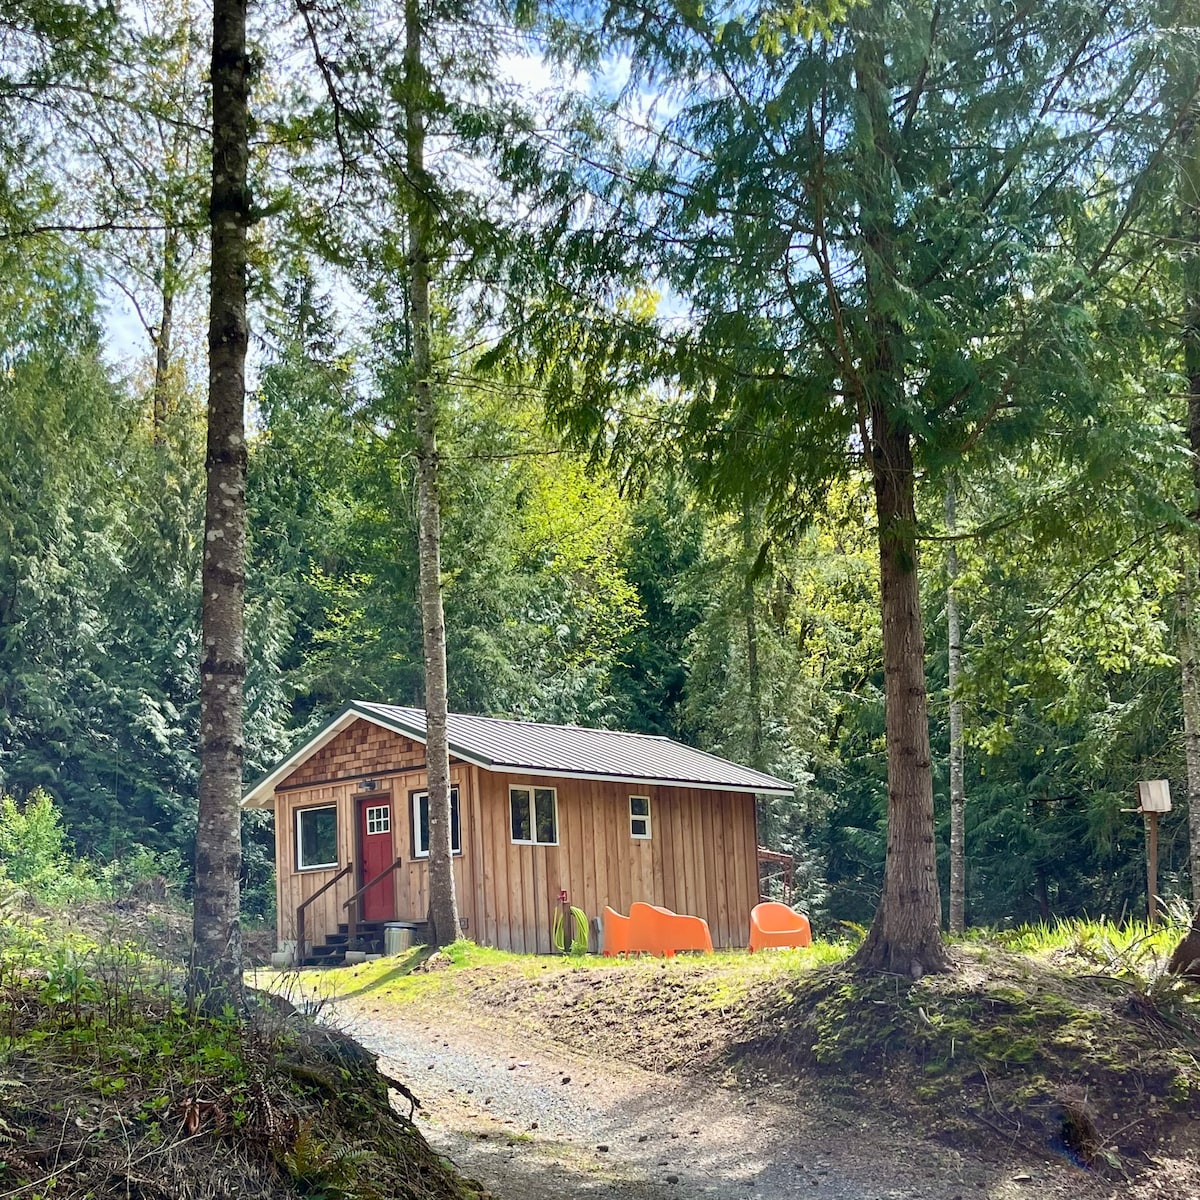 Backwoods Cabin - private woods for you to explore